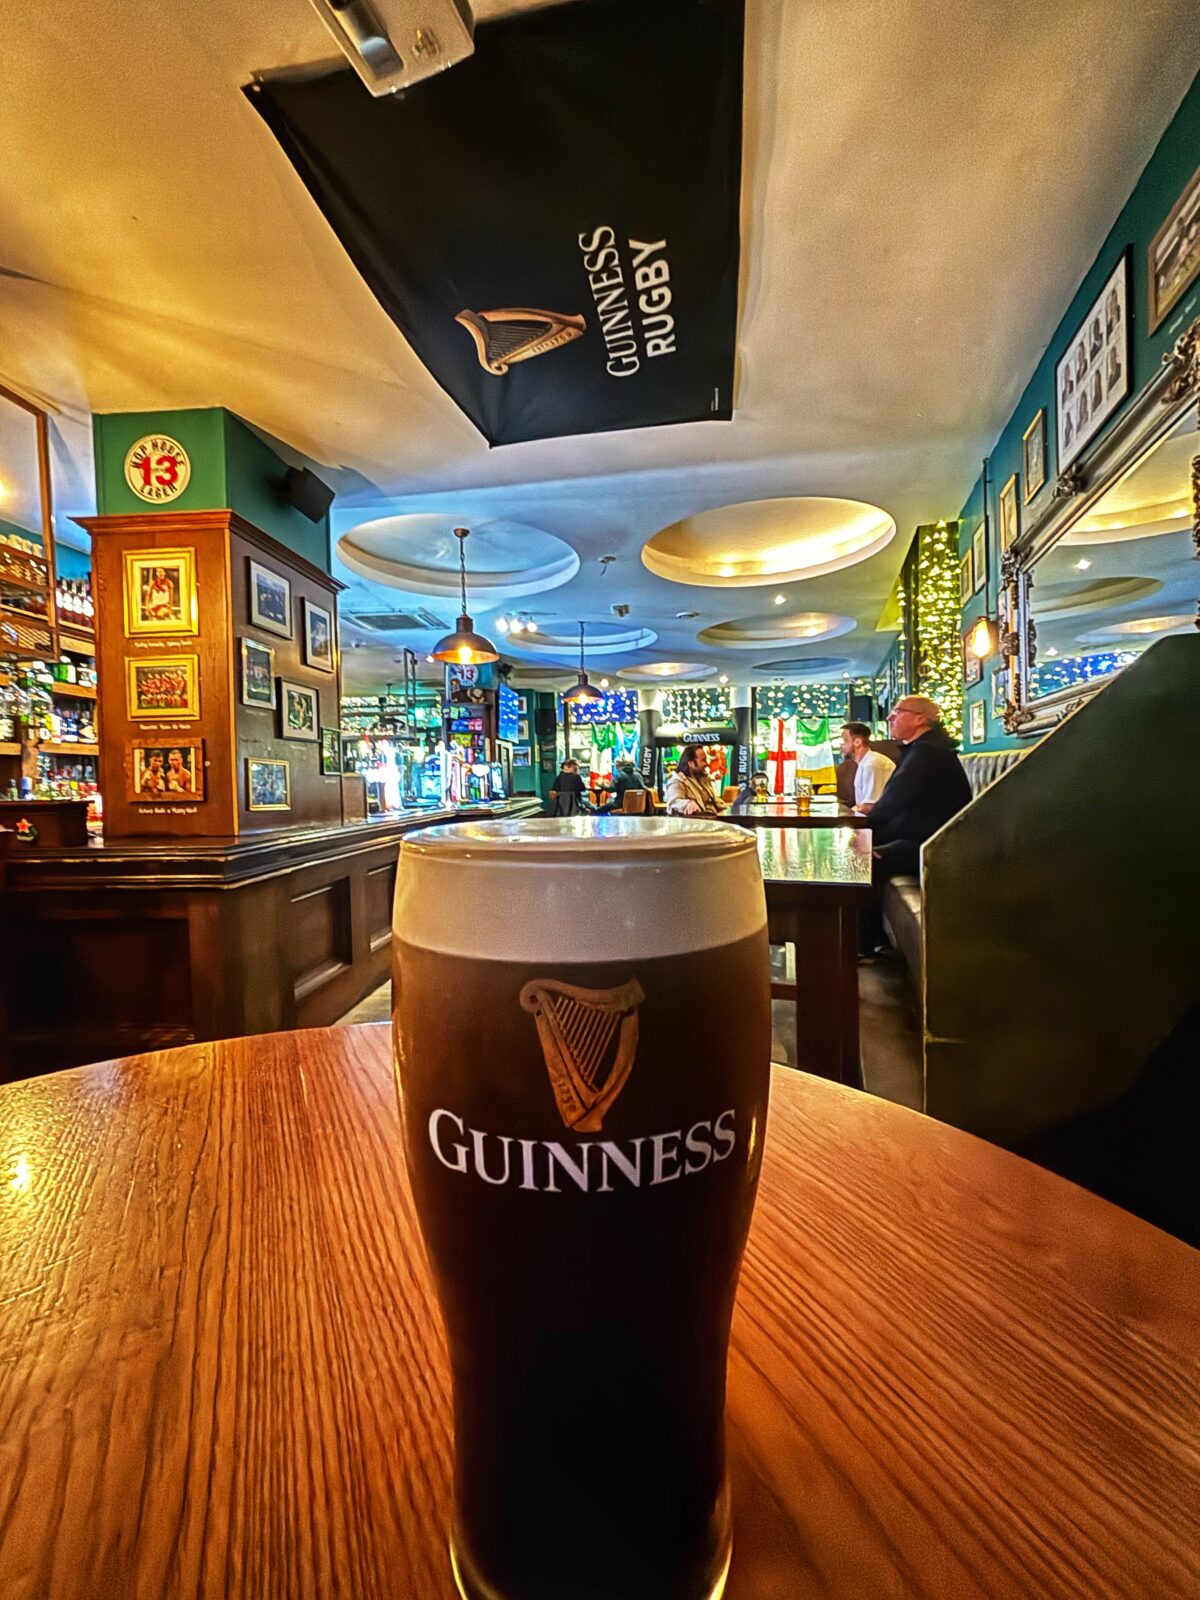 where does good guinness in manchester?